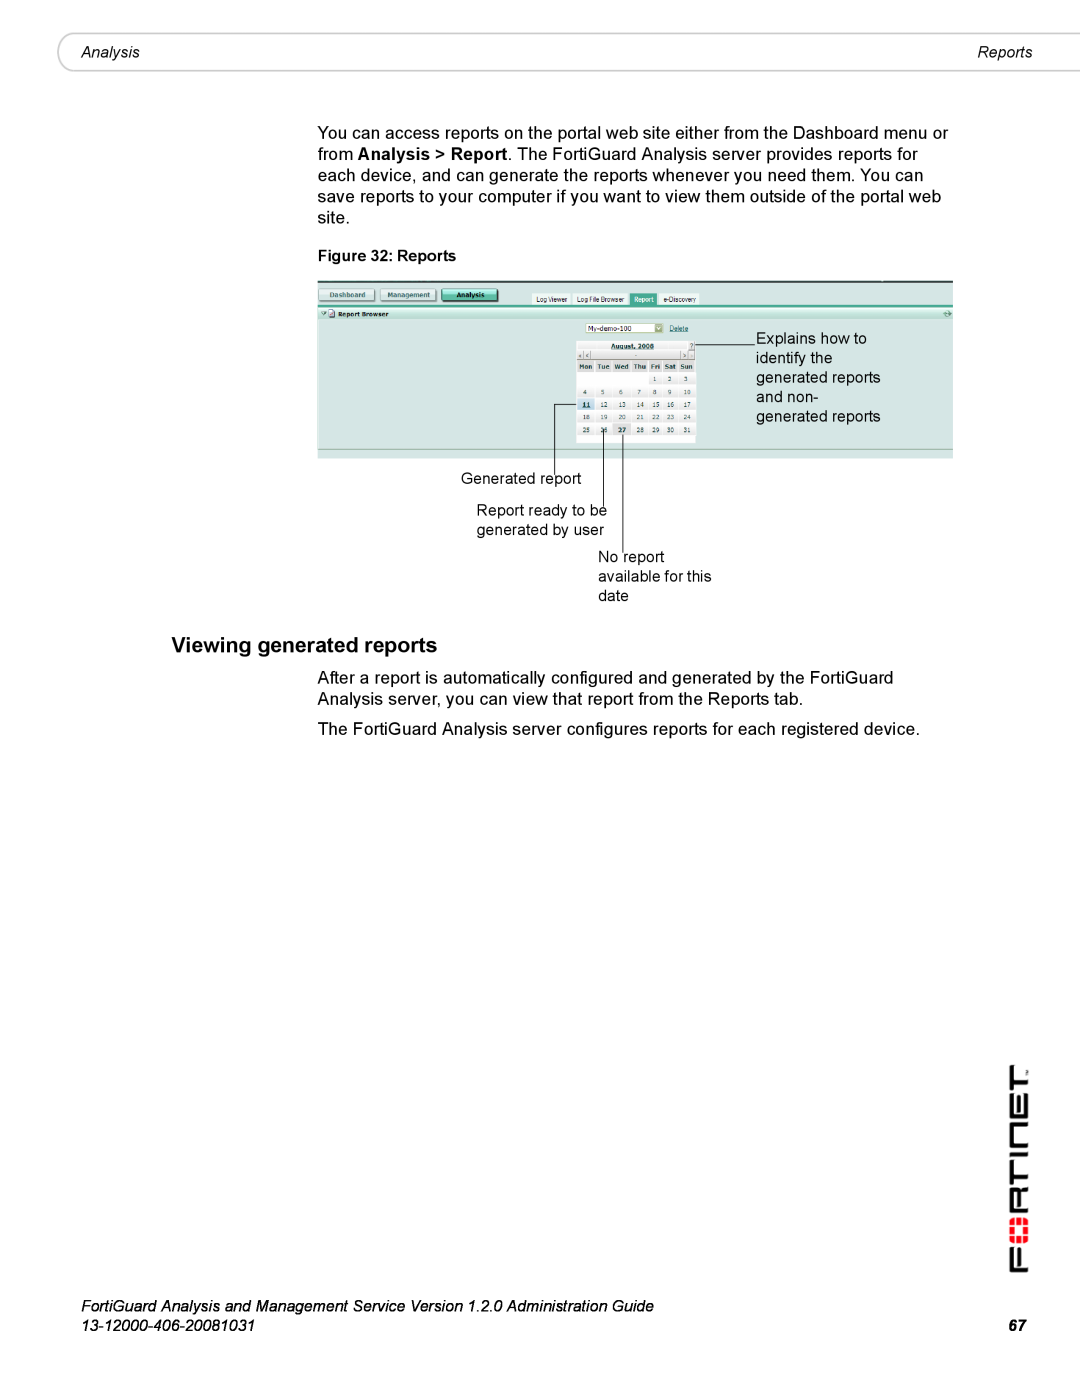 Fortinet 1.2.0 manual Viewing generated reports, Reports 